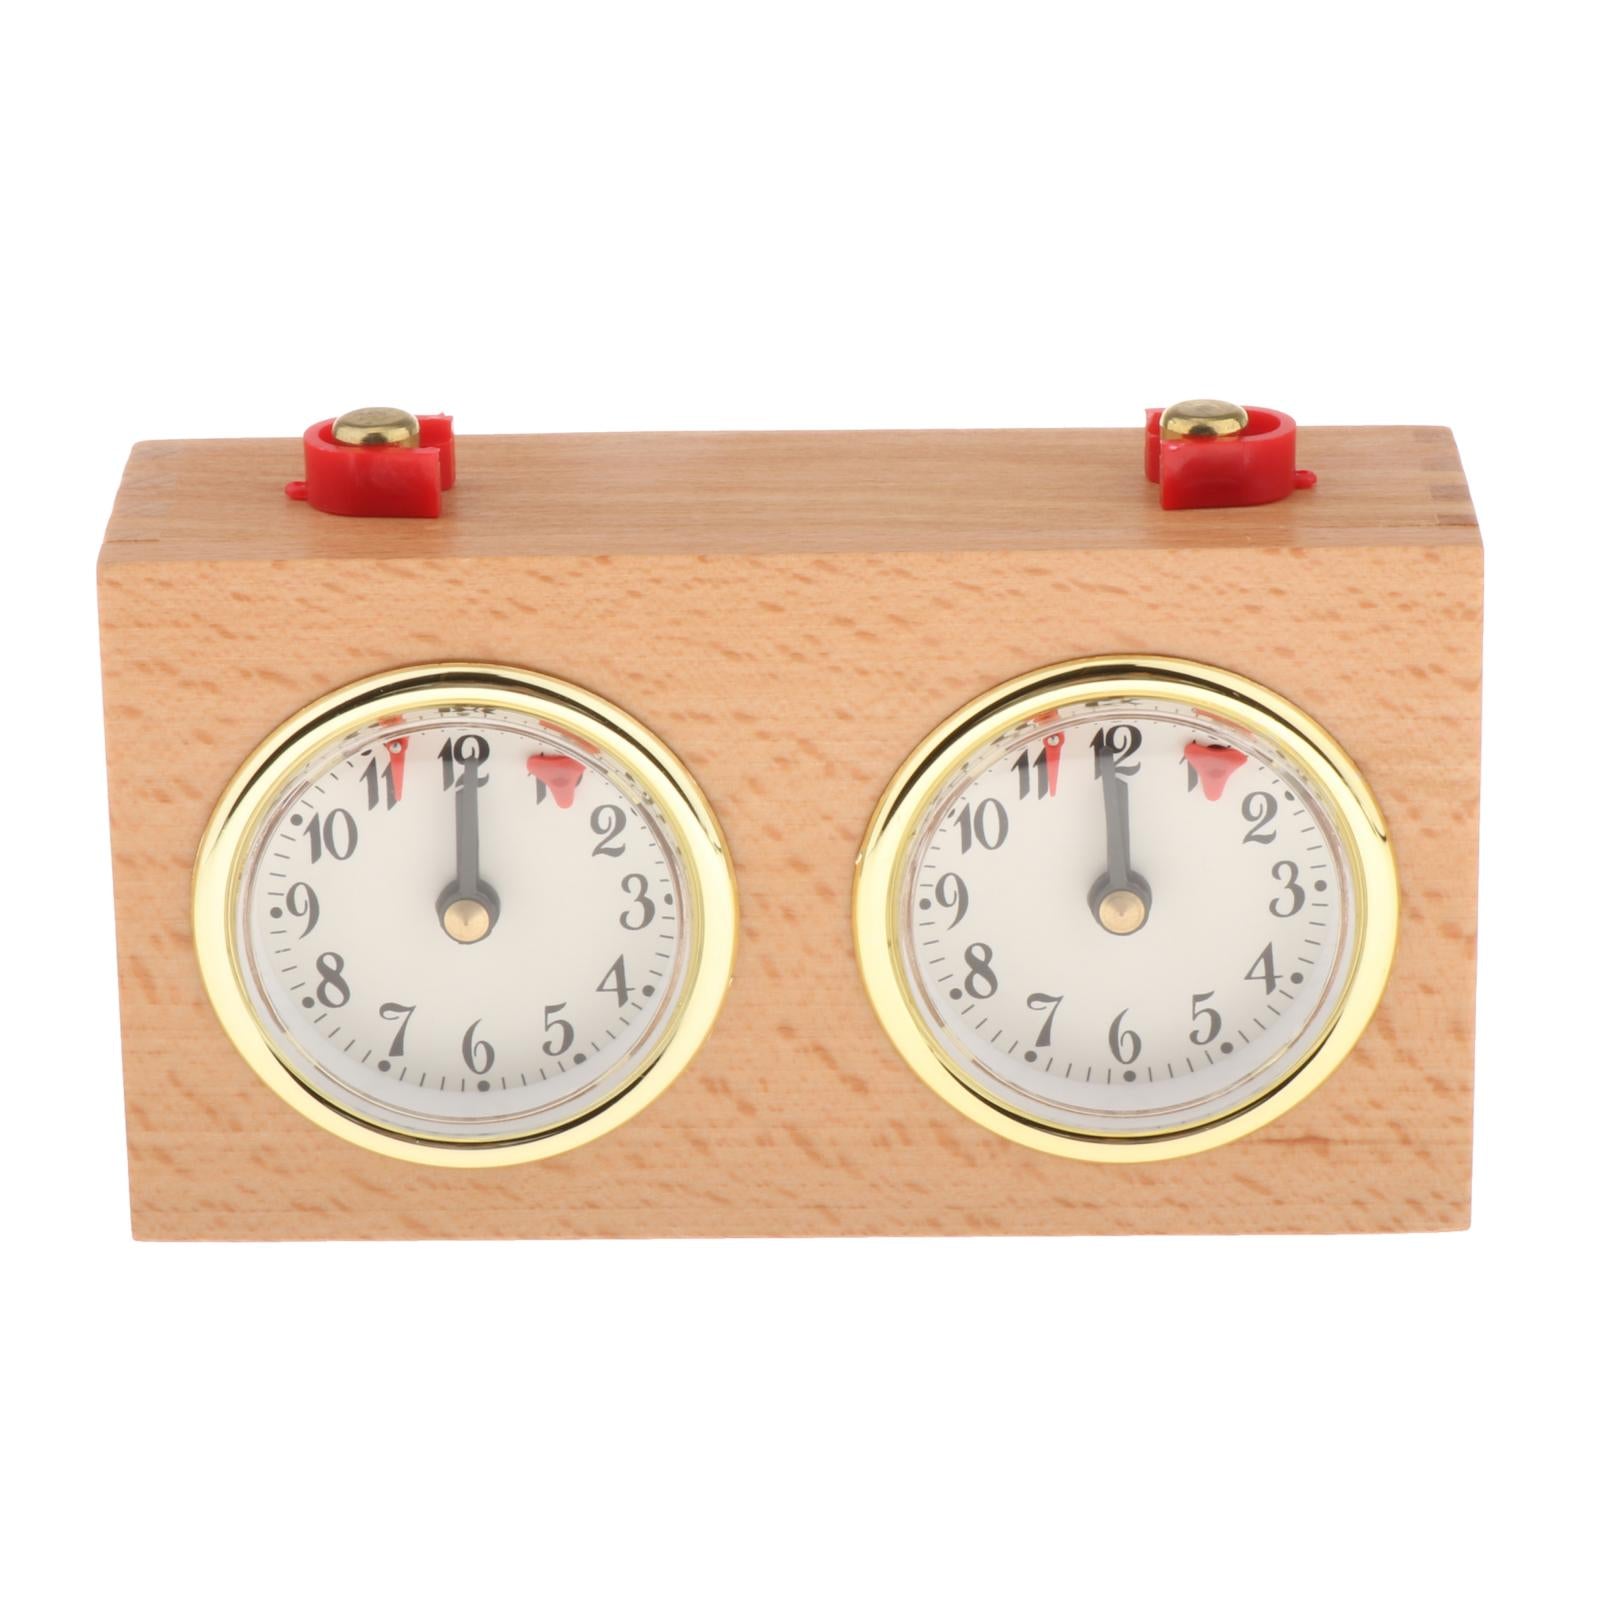 1pc Competition Game Analog Chess Clock Timer Gift for Board Games Clock